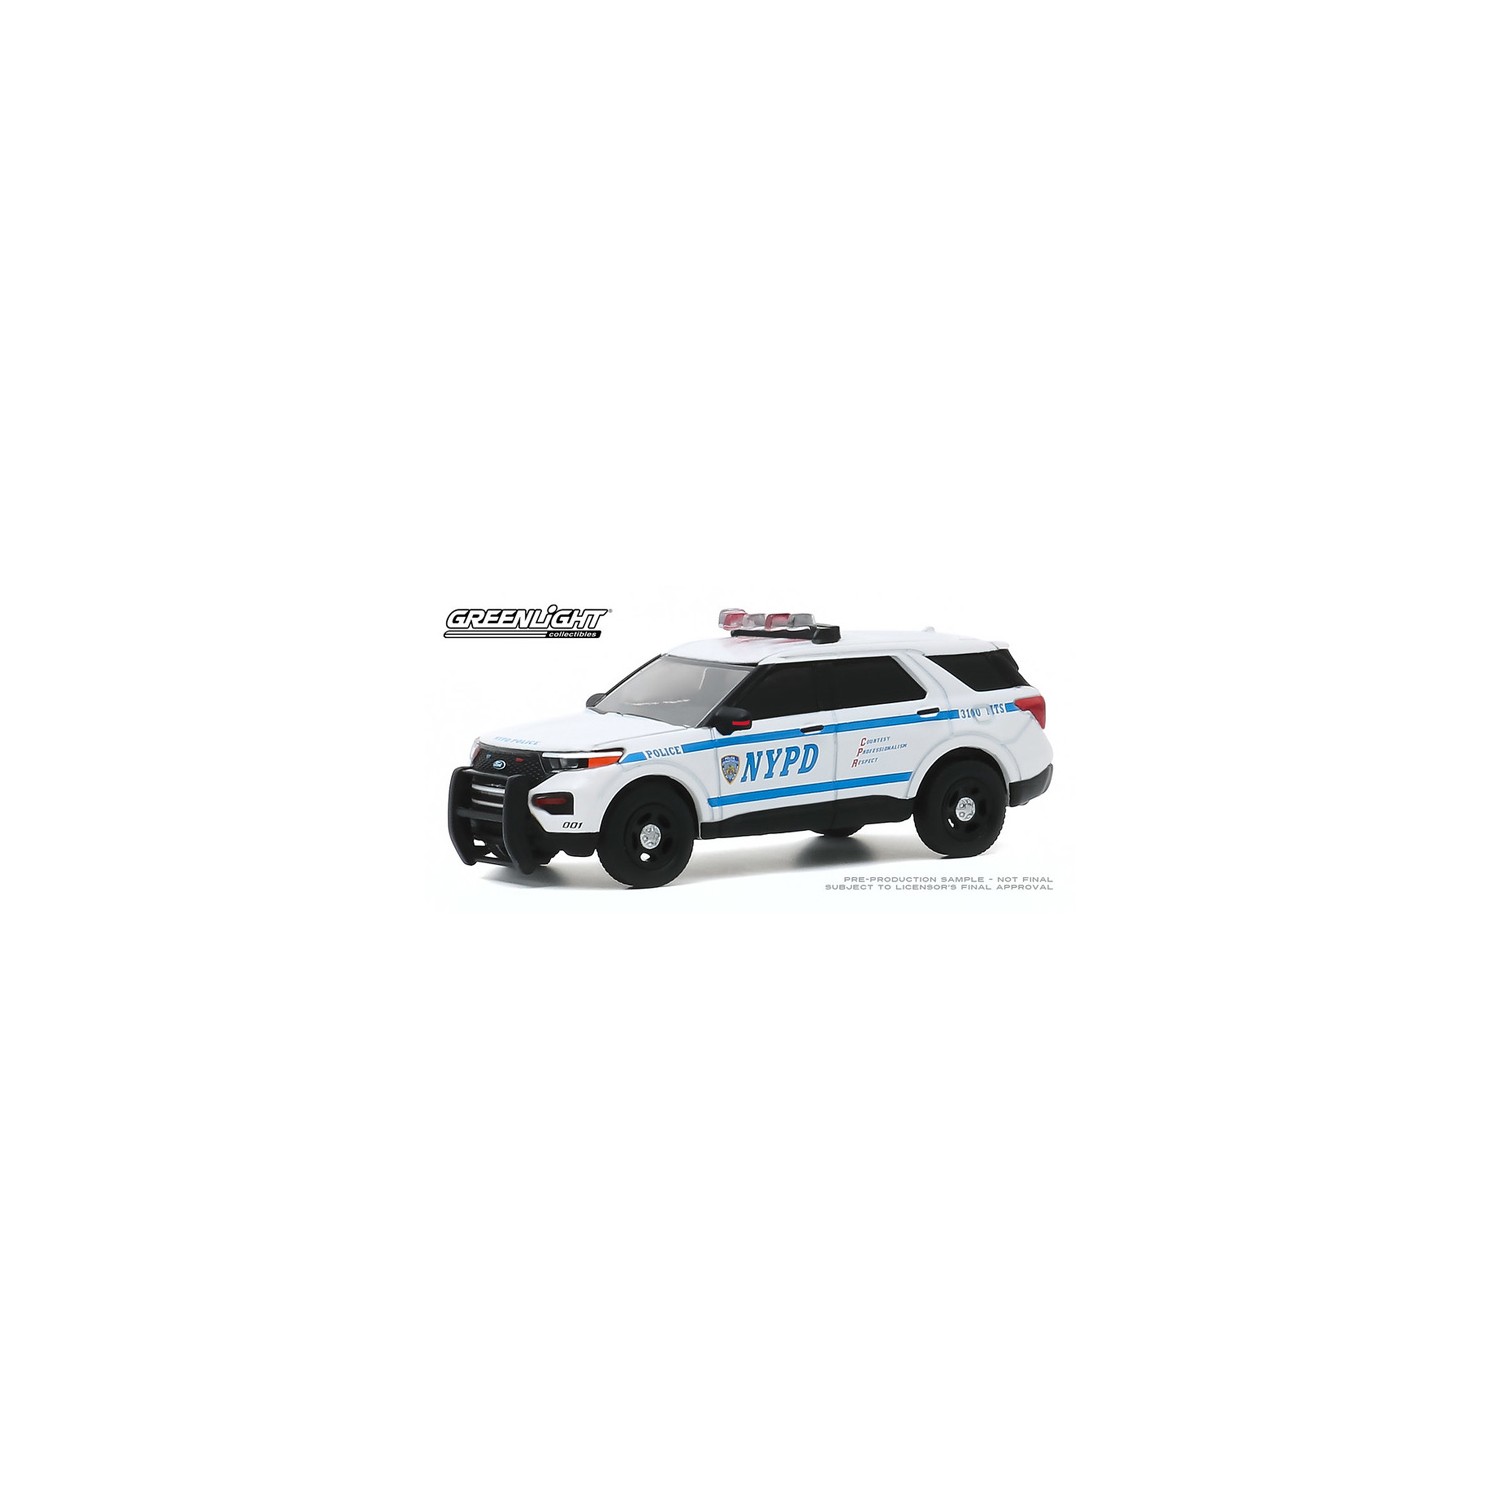 NYPD 42920 F chase GREENLIGHT 1/64 2020 FORD INTERCEPTOR NEW YORK CITY POLICE 